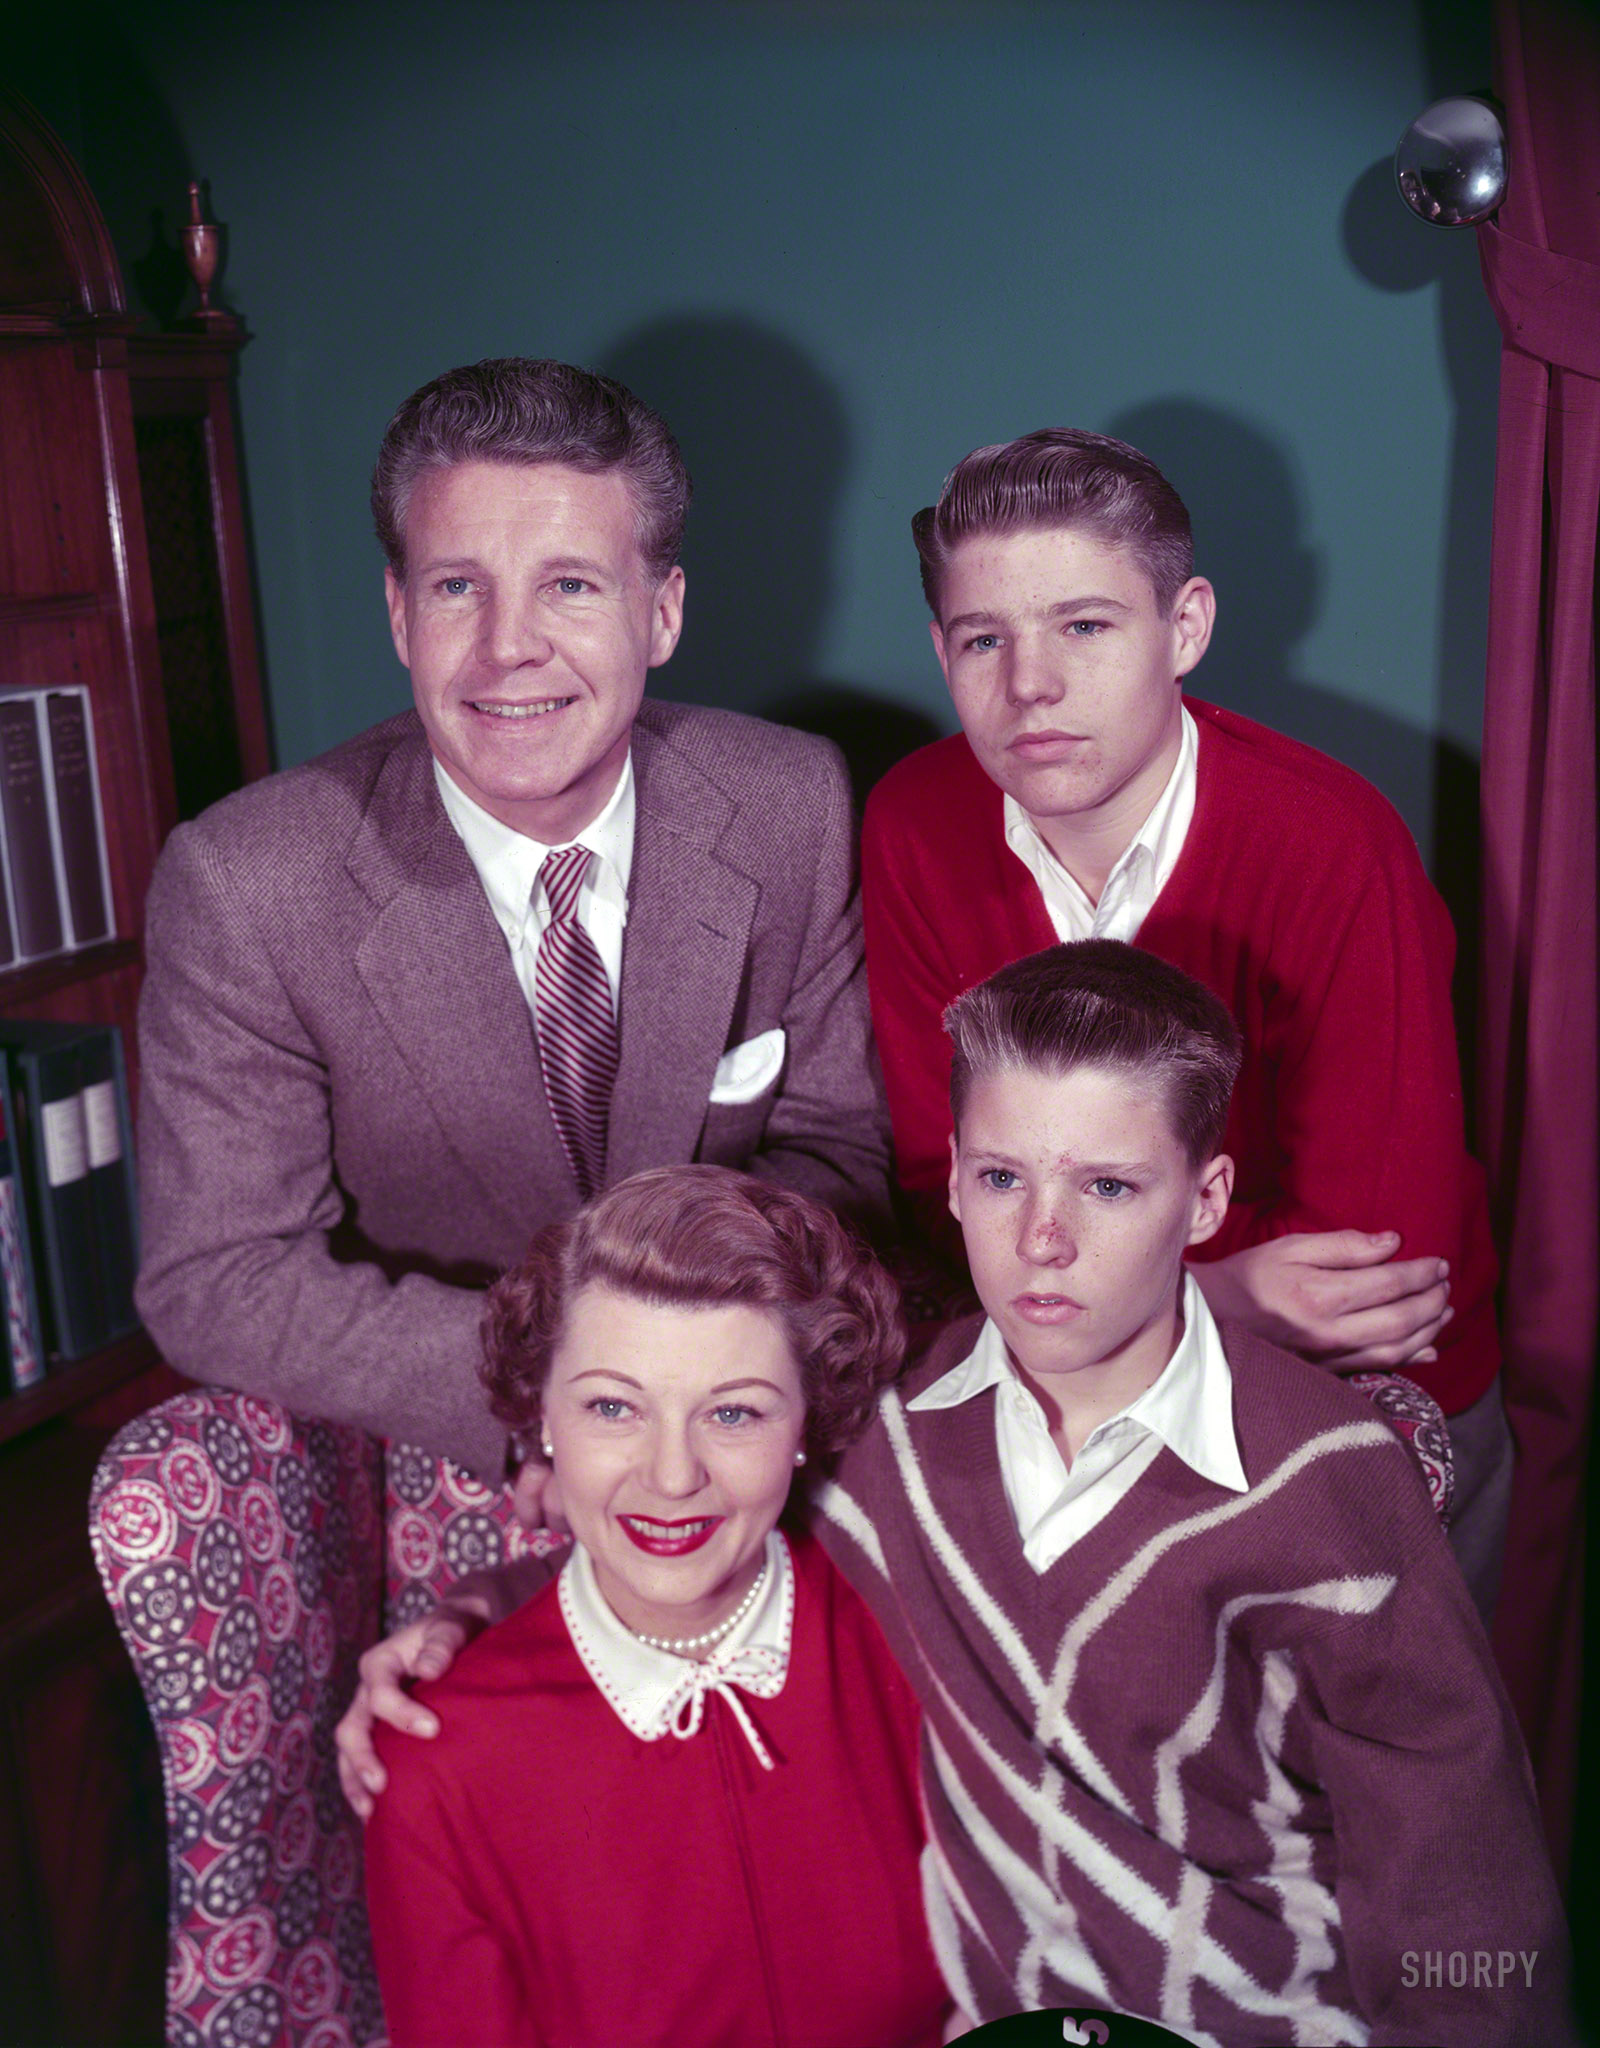 January 1953. "Ozzie, Harriet, David, and Ricky Nelson of  television show The Adventures of Ozzie and Harriet," a sitcom that ran from 1952 to 1966. Color transparency by Earl Theisen for Look magazine. View full size.